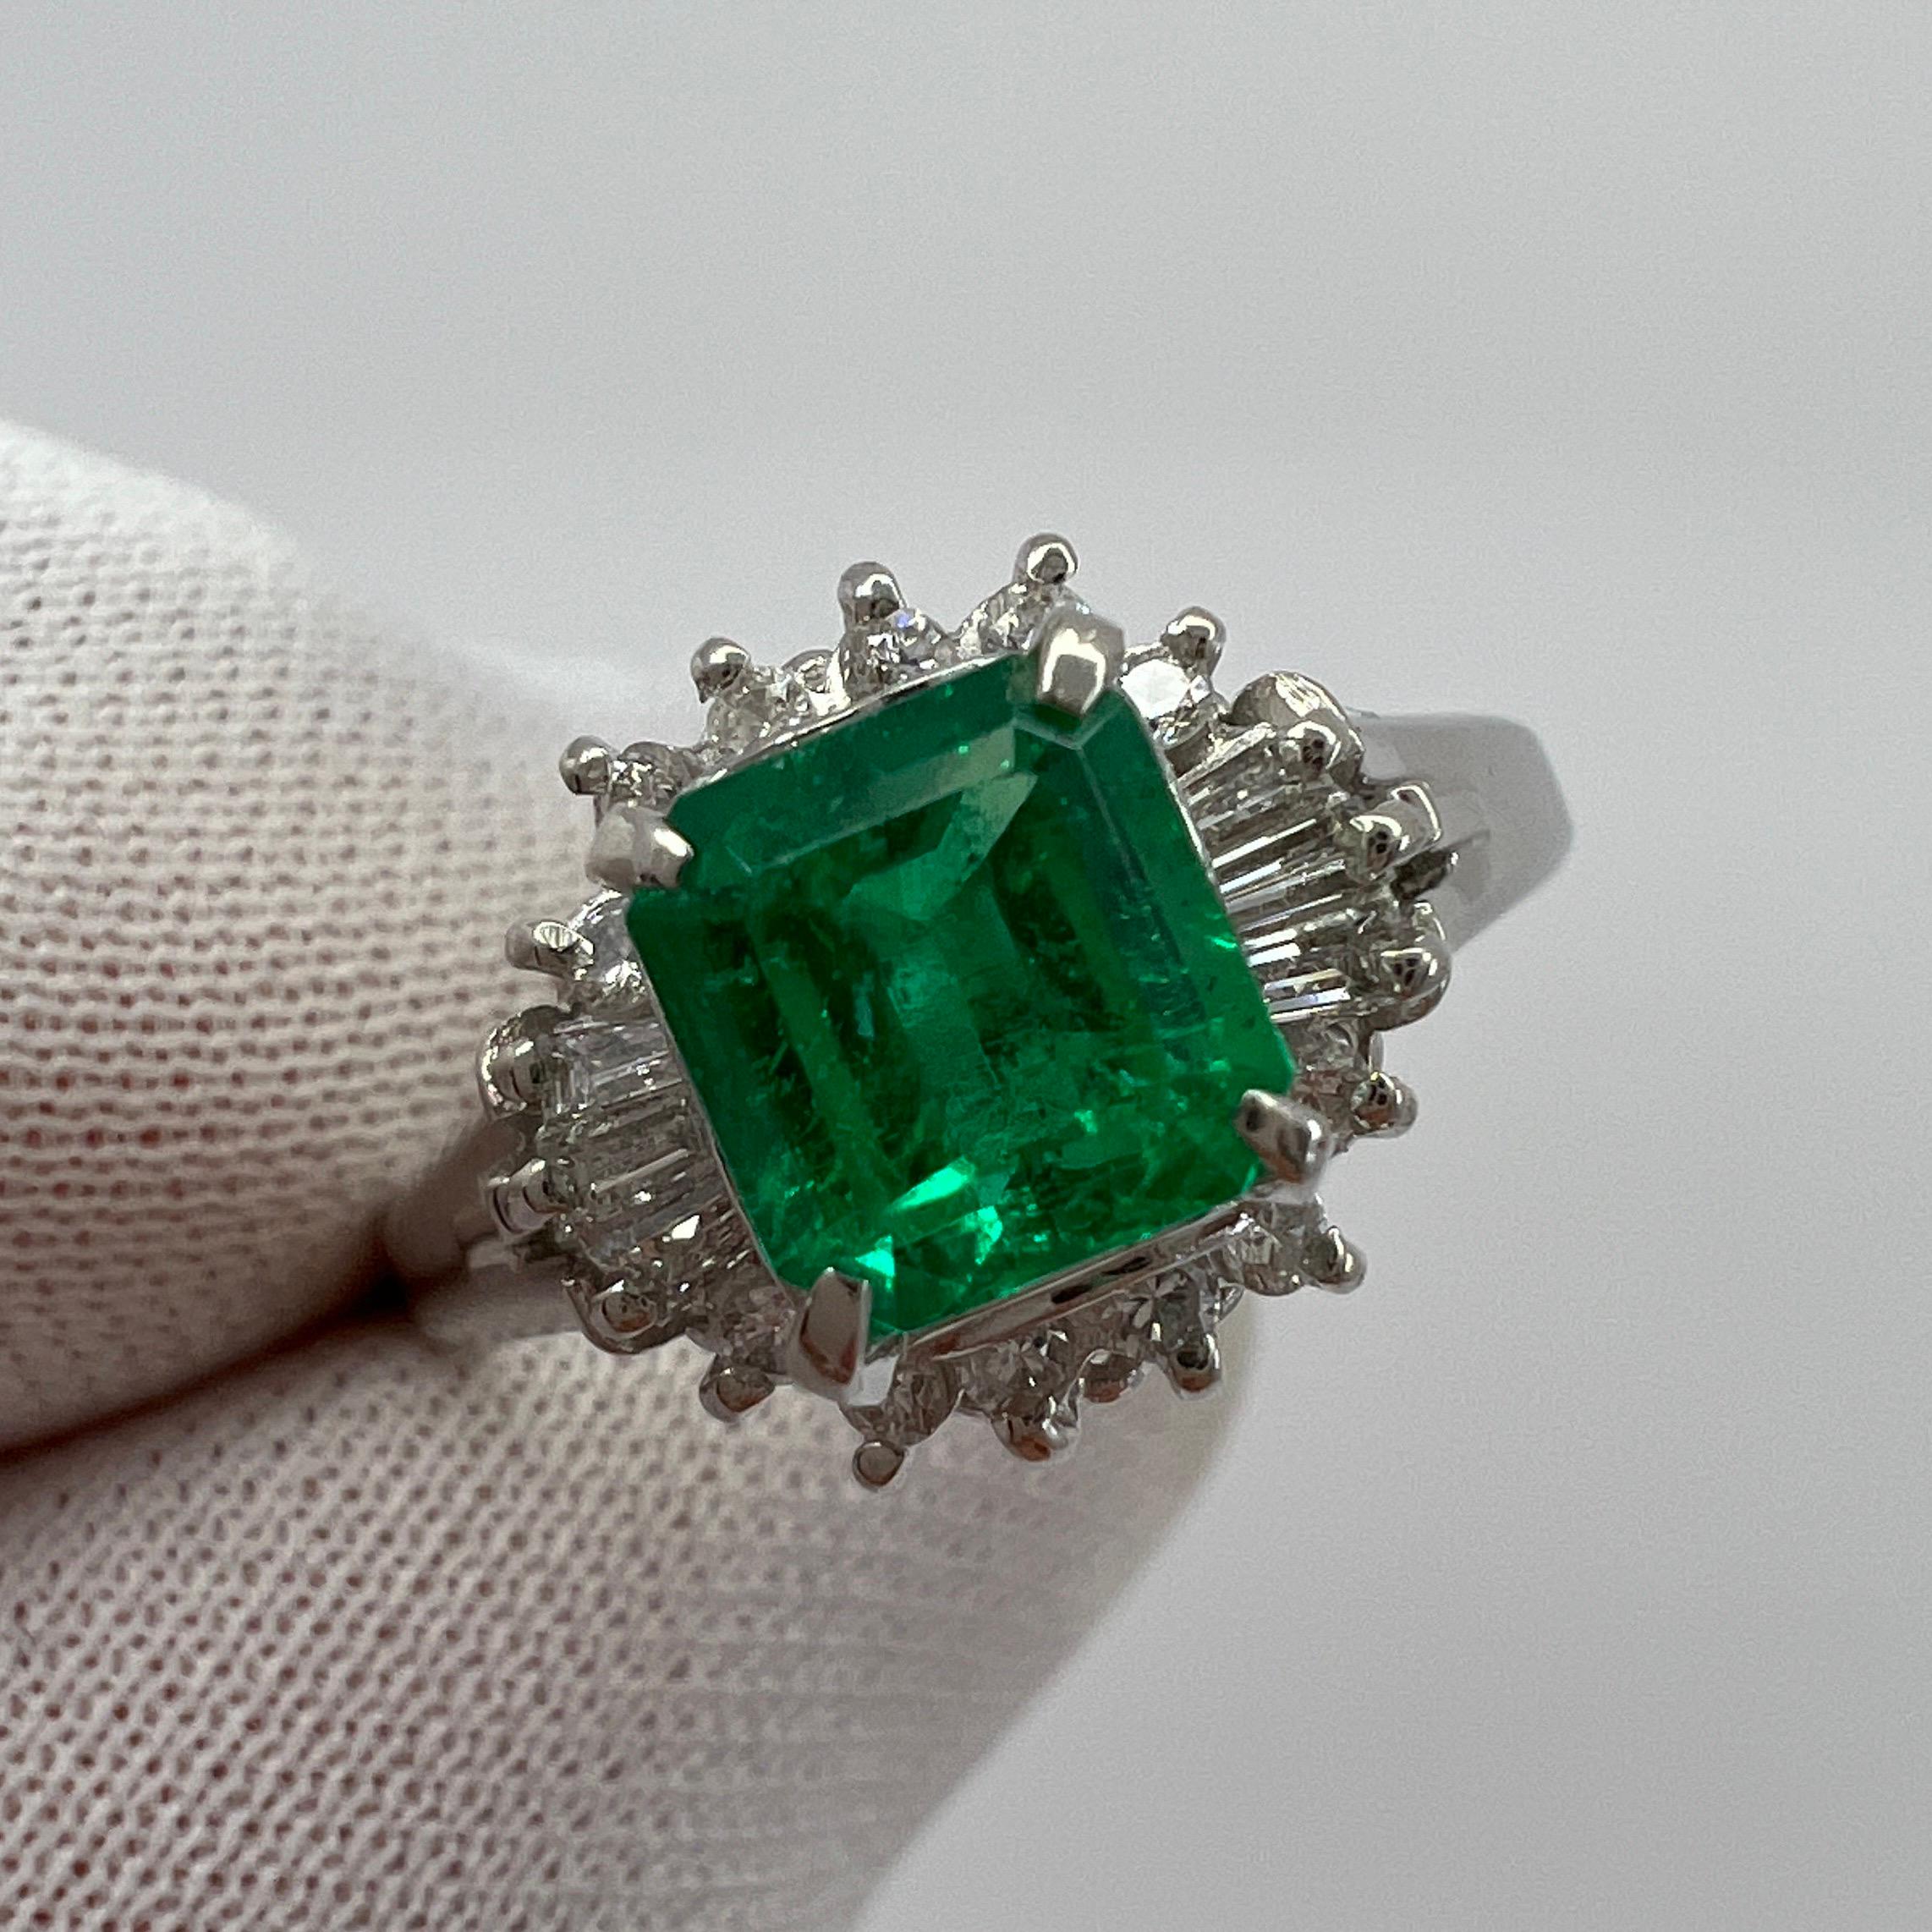 Fine Vivid Green Emerald & Diamond Platinum Halo Cocktail Ring.

1.10 Total carat weight. Stunning 0.86 carat Colombian emerald with a fine vivid green colour and an excellent emerald octagonal cut. The emerald has very good clarity, very clean